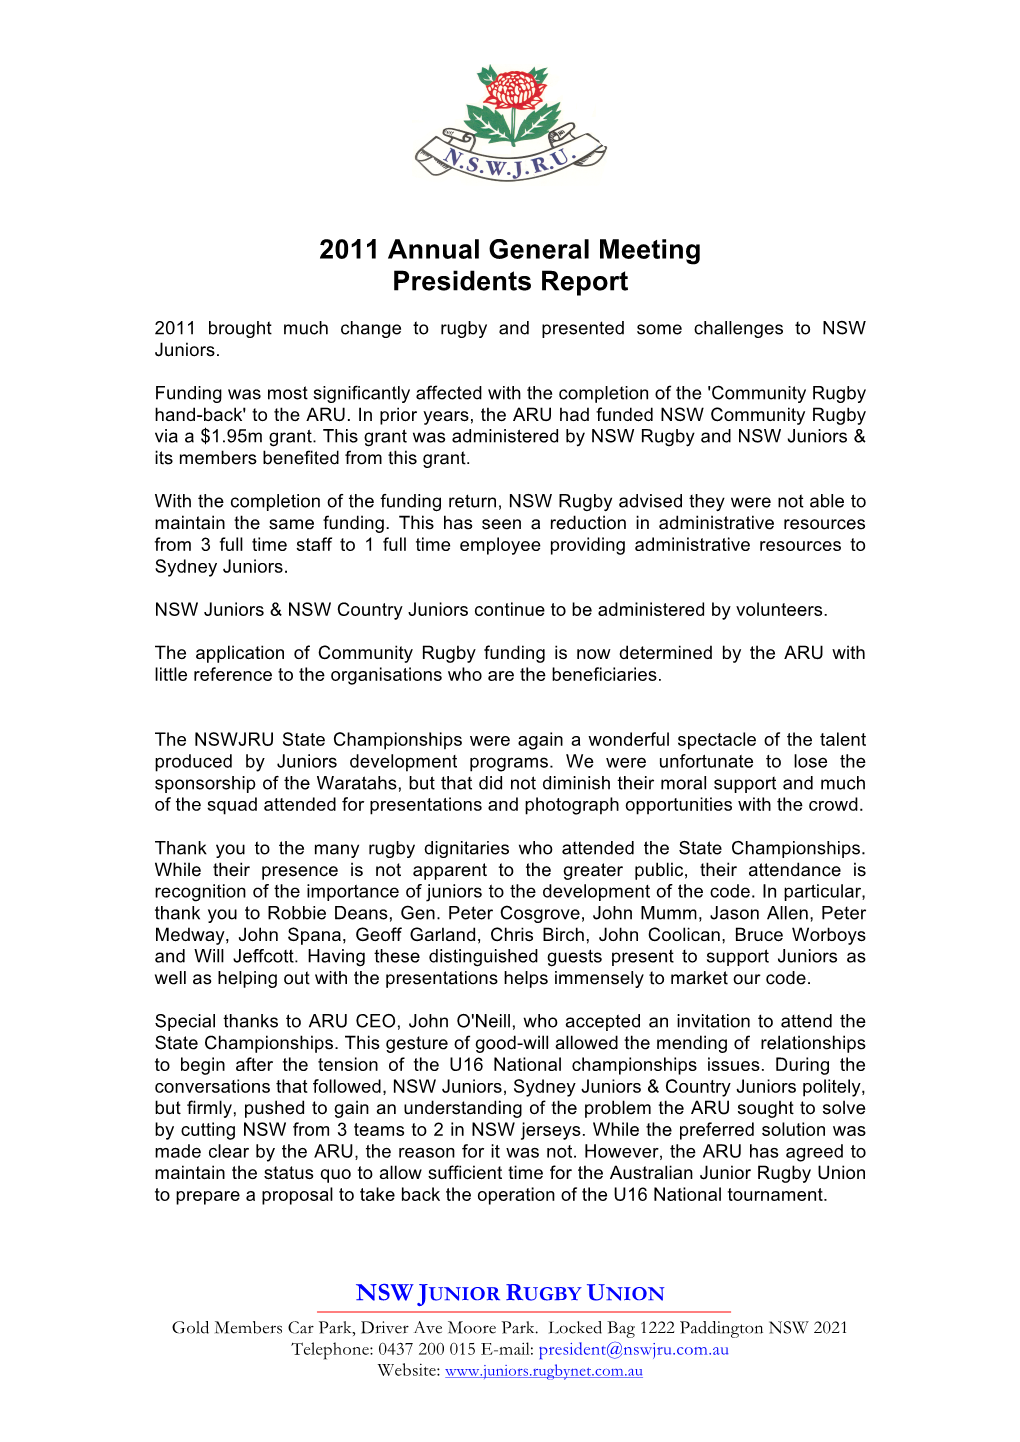 2011 Annual General Meeting Presidents Report